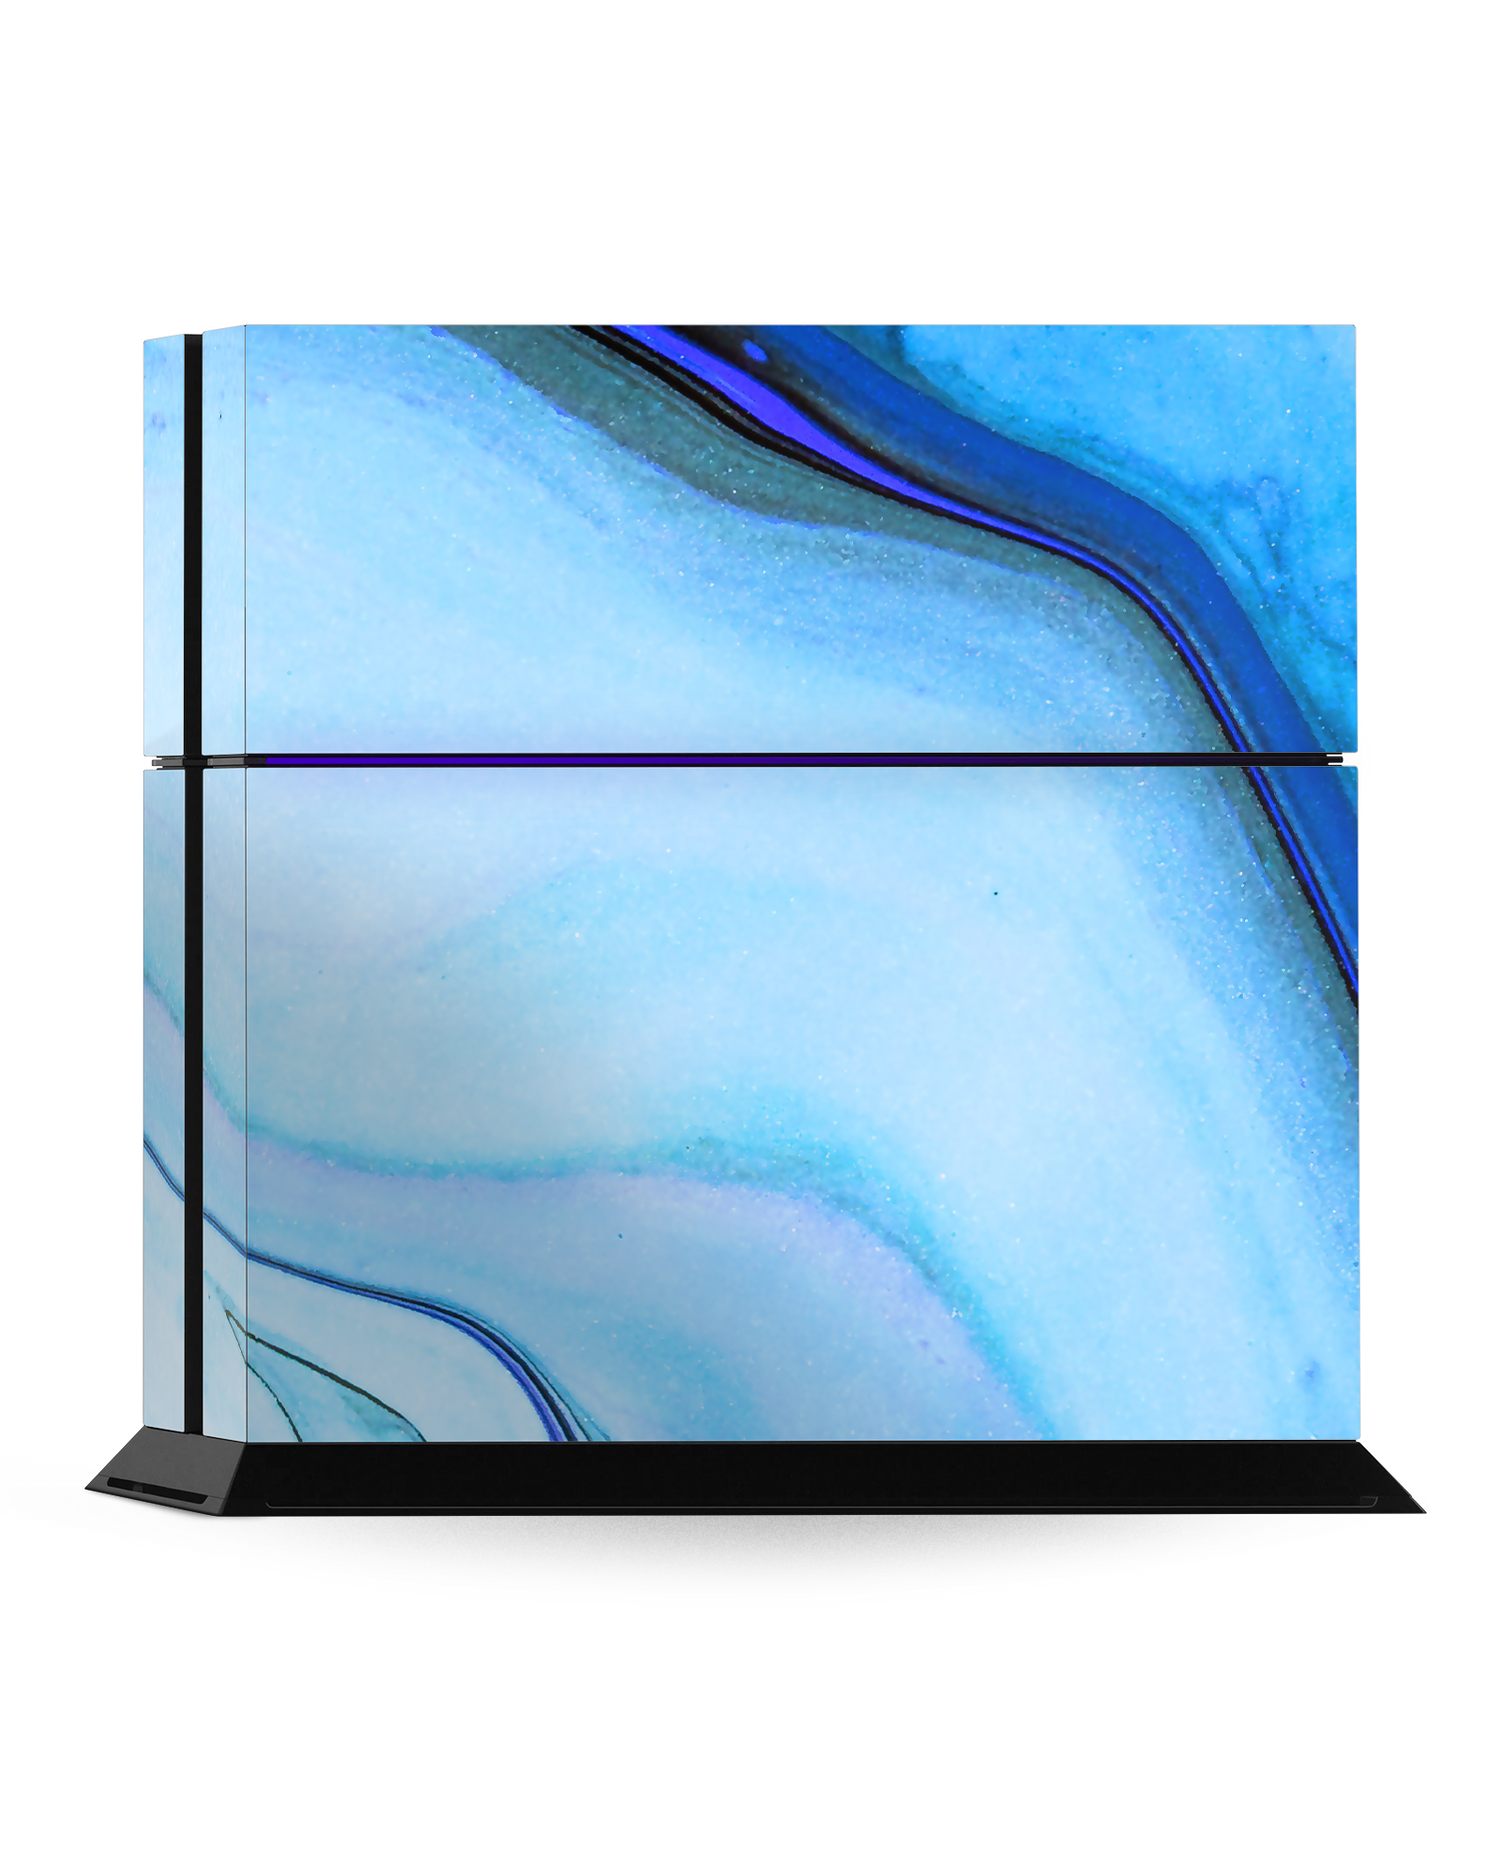 Cool Blues Console Skin for Sony PlayStation 4: Standing